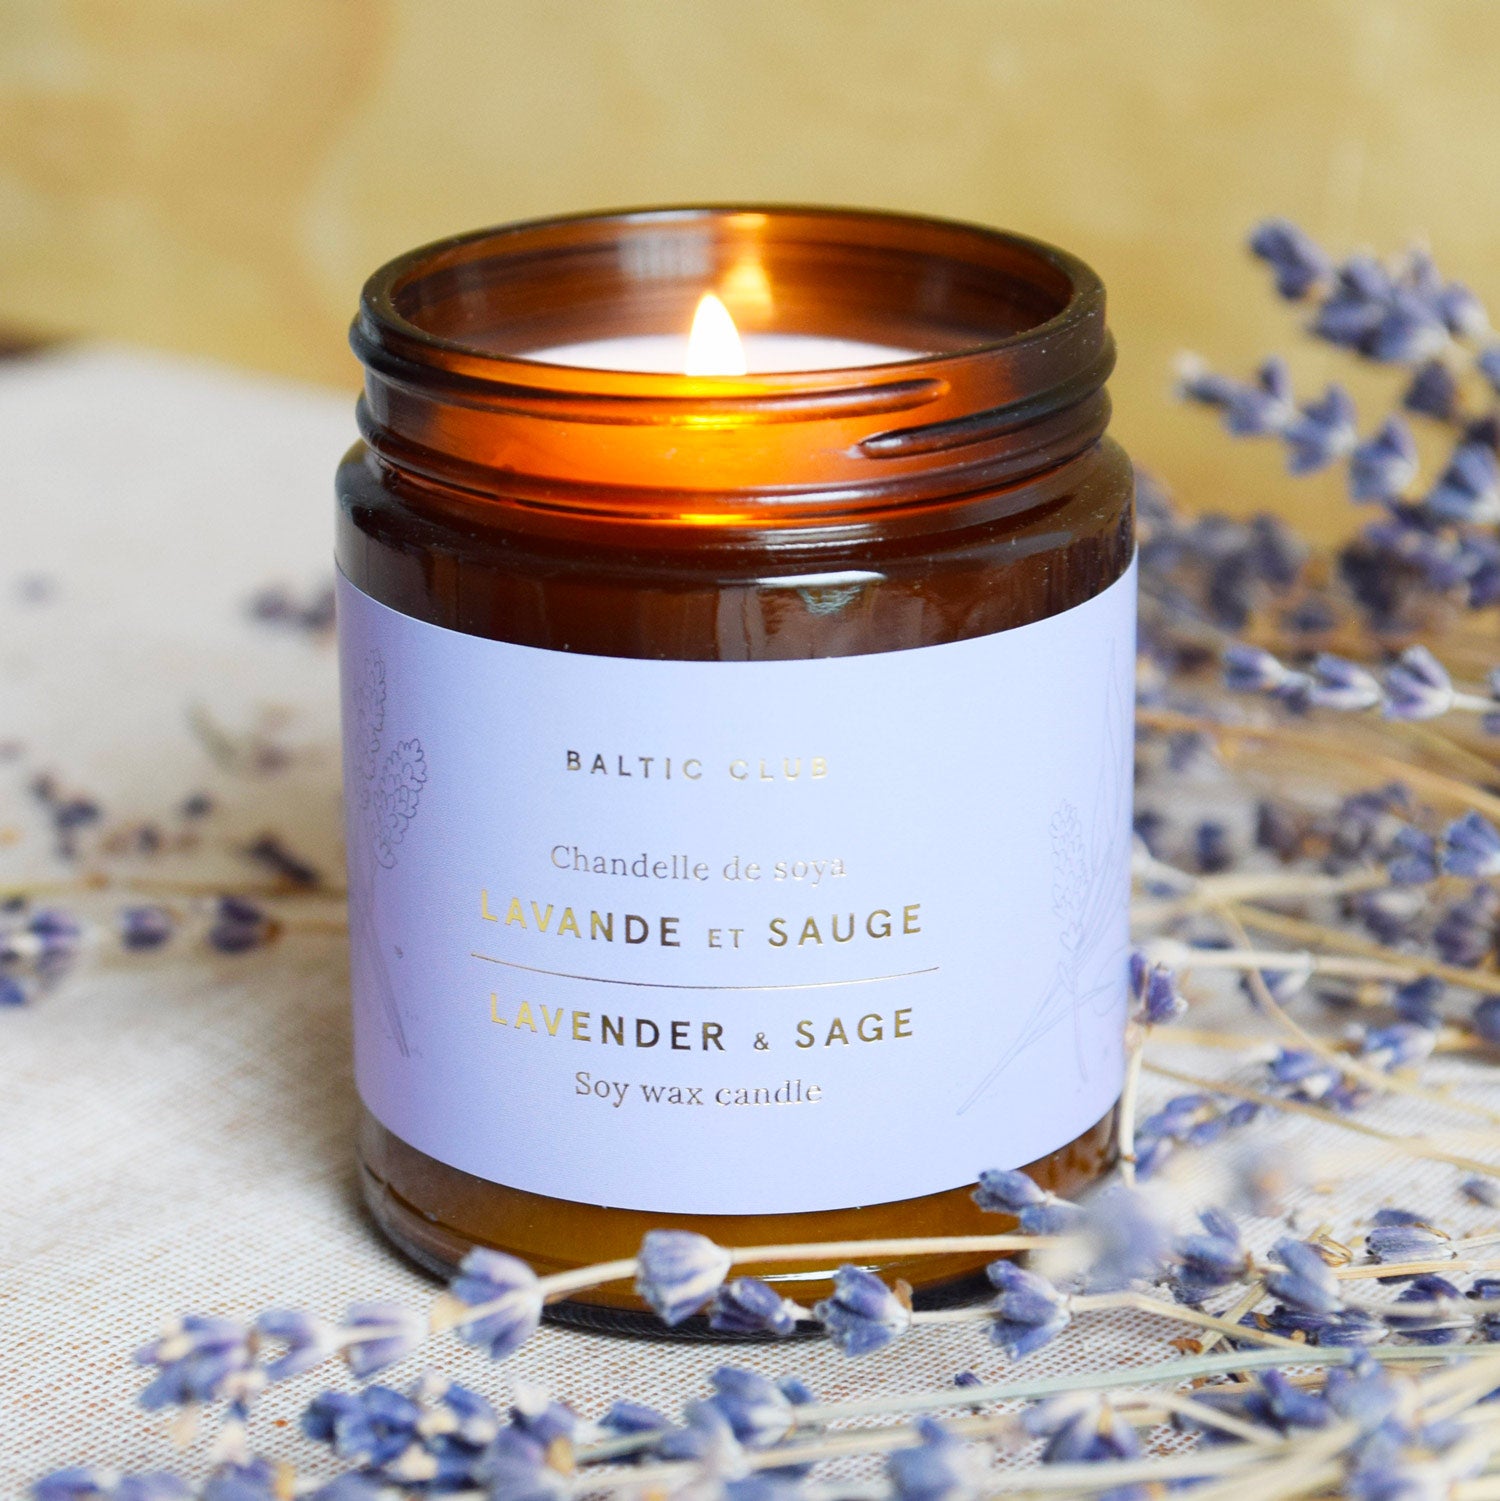 Lavender & Sage Candle from Baltic Club, close view of the label